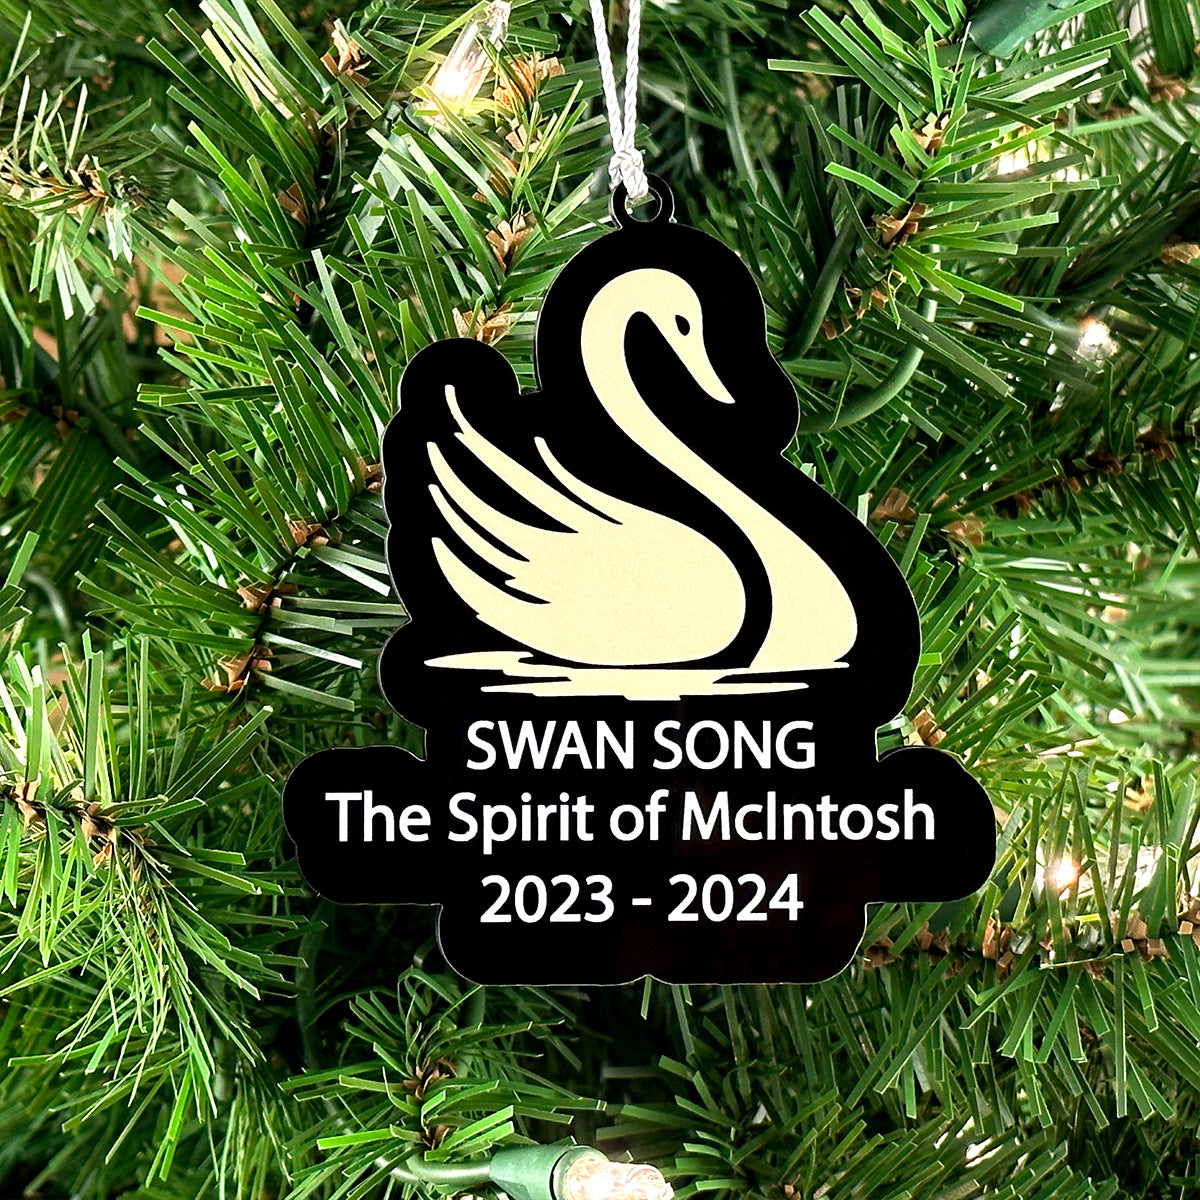 The Spirit of McIntosh Swan Song 2023 - 2024 Ornament